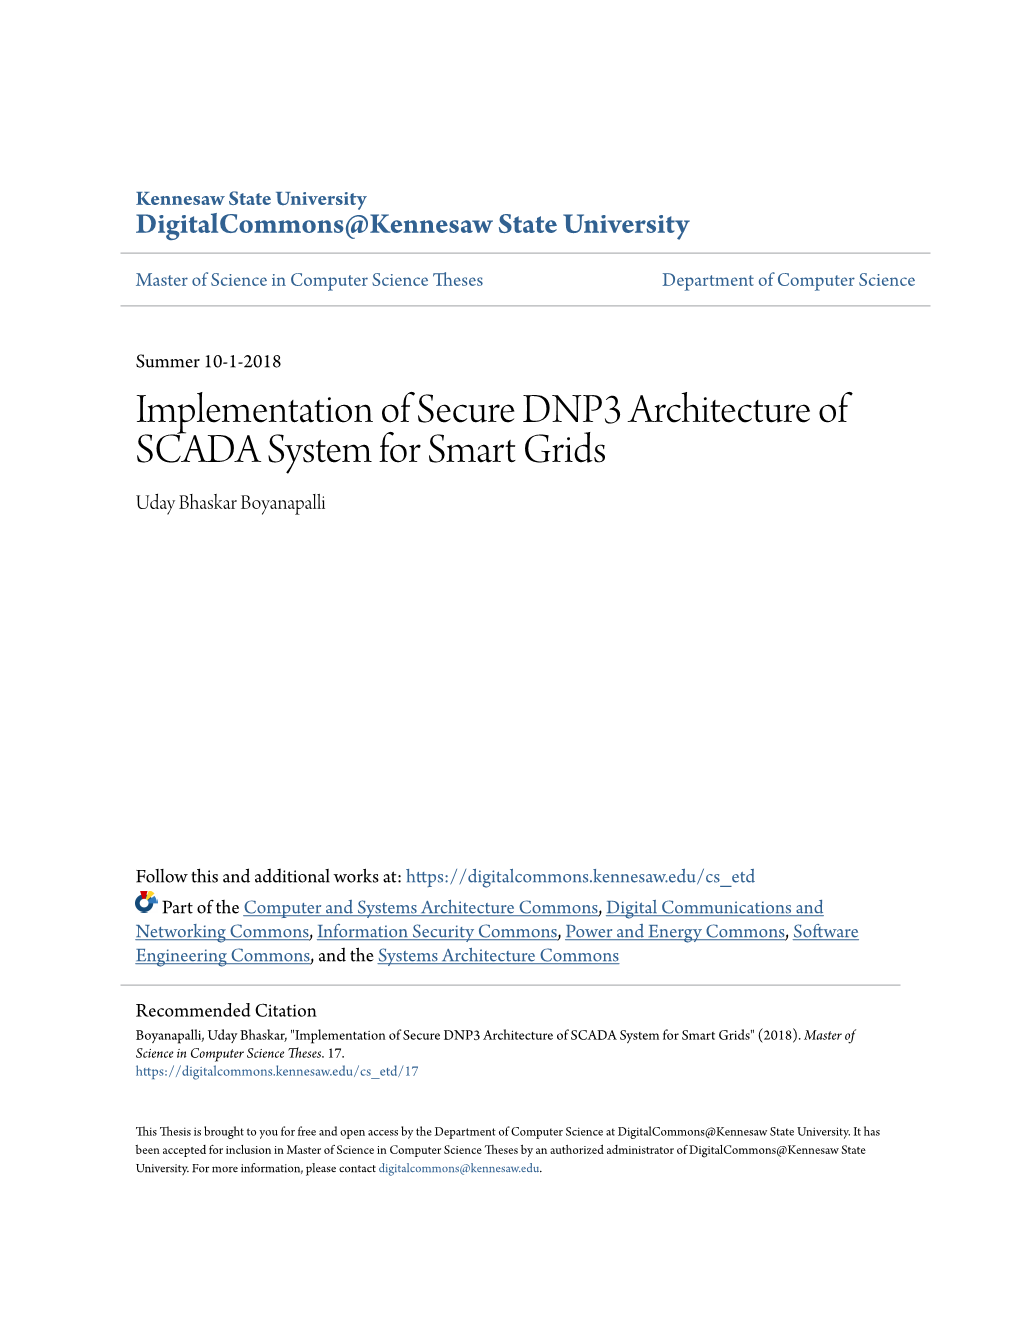 Implementation of Secure DNP3 Architecture of SCADA System for Smart Grids Uday Bhaskar Boyanapalli